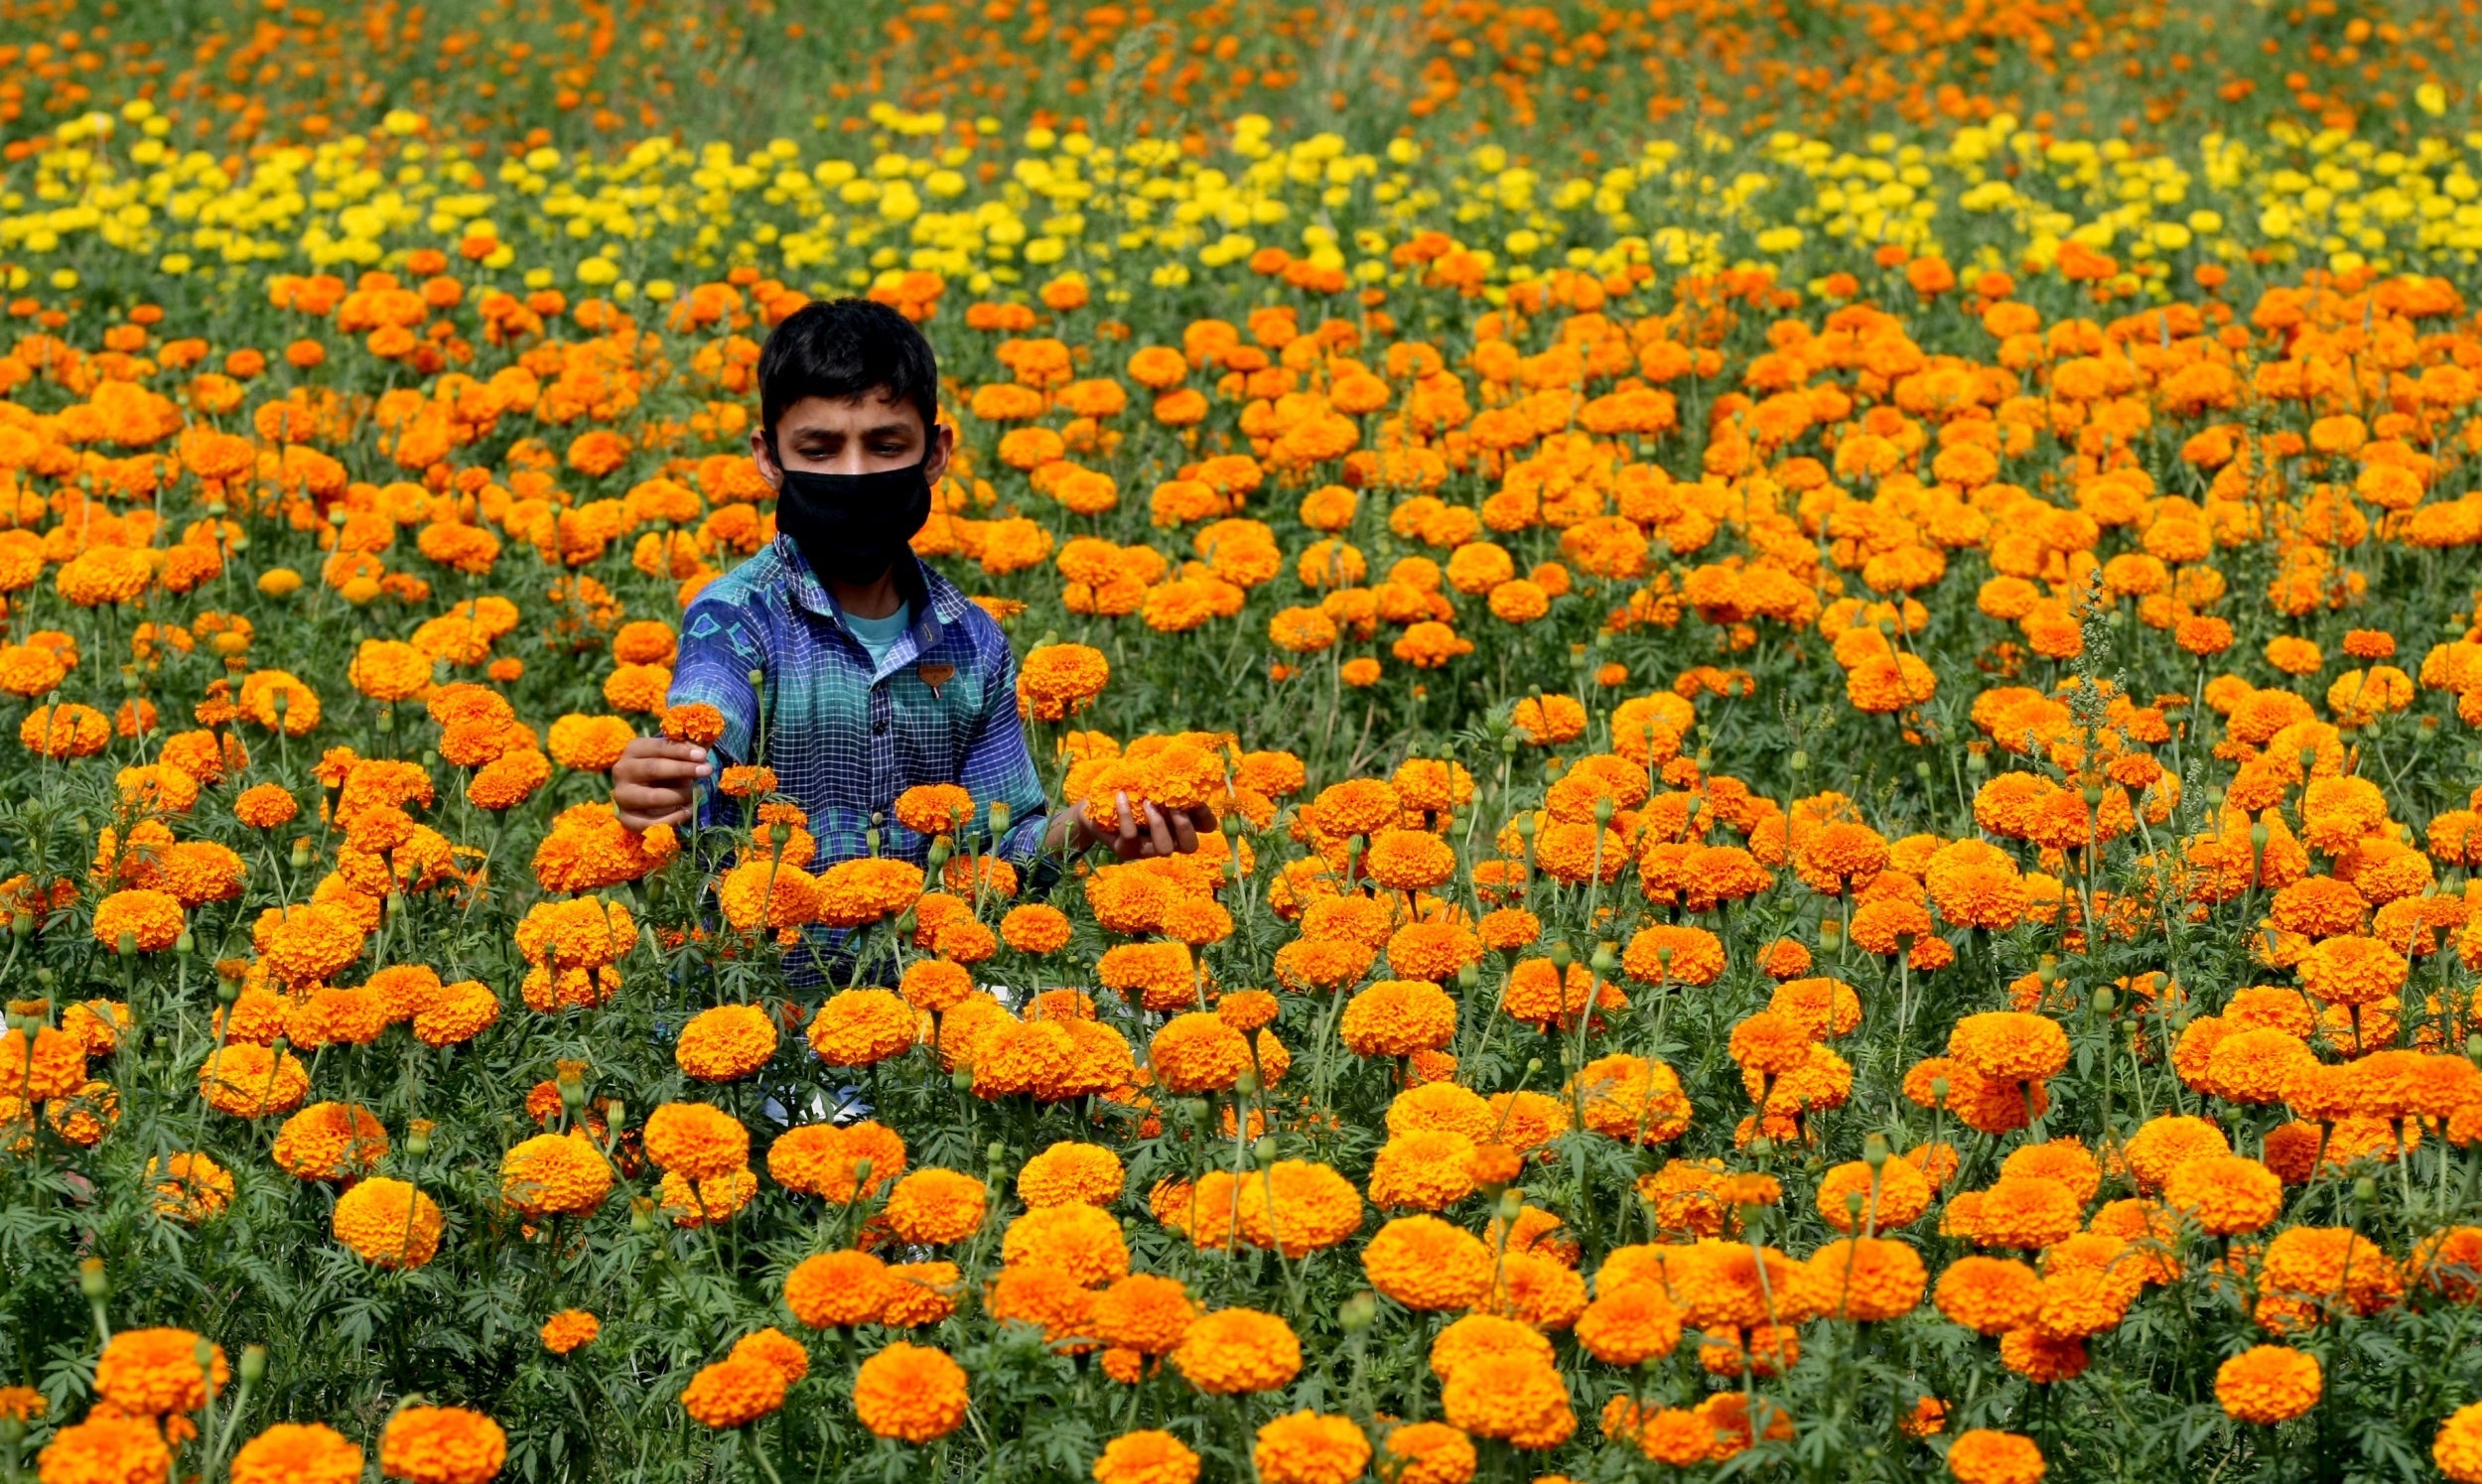 Collecting marigold flowers from a field during the nationwide lockdown at Abdullian village, near the India-Pakistan international border, on 20 April